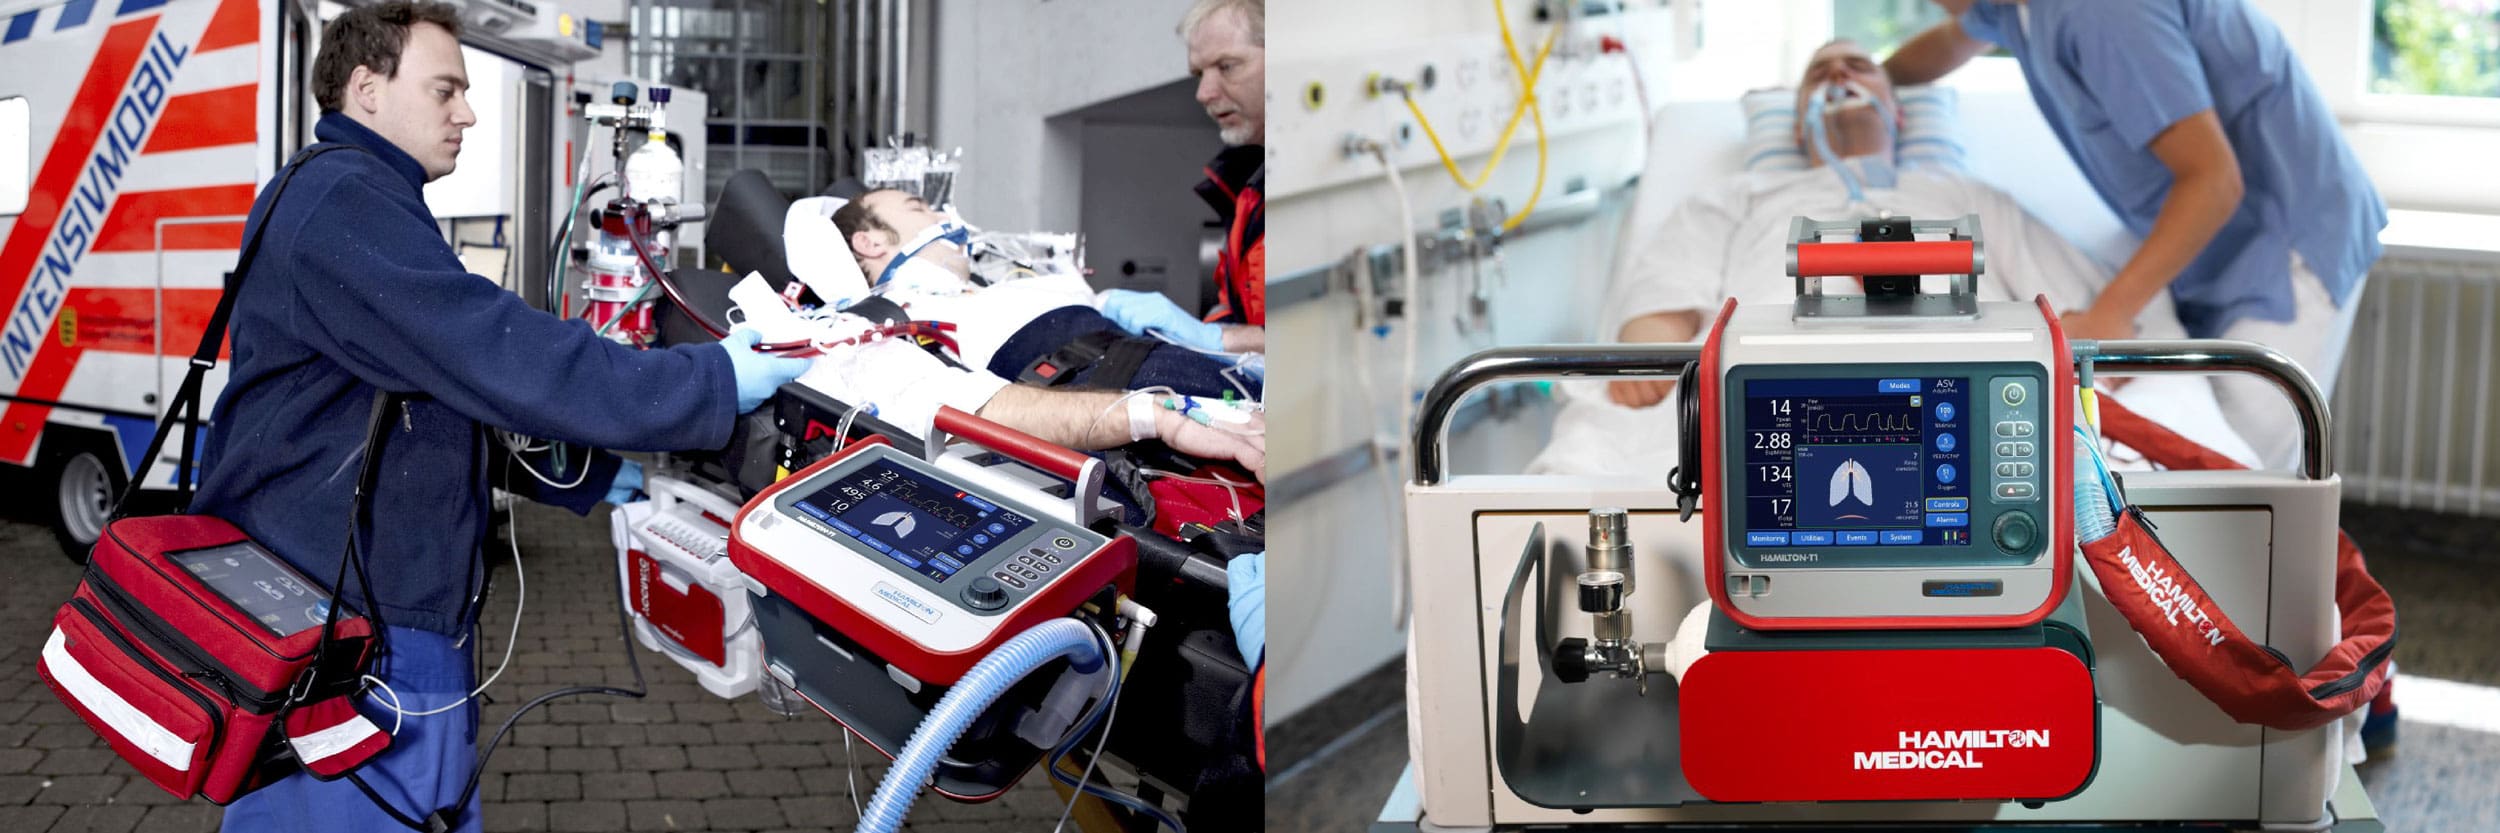 Hamilton T1 Medical Ventilator being used by emergency personel